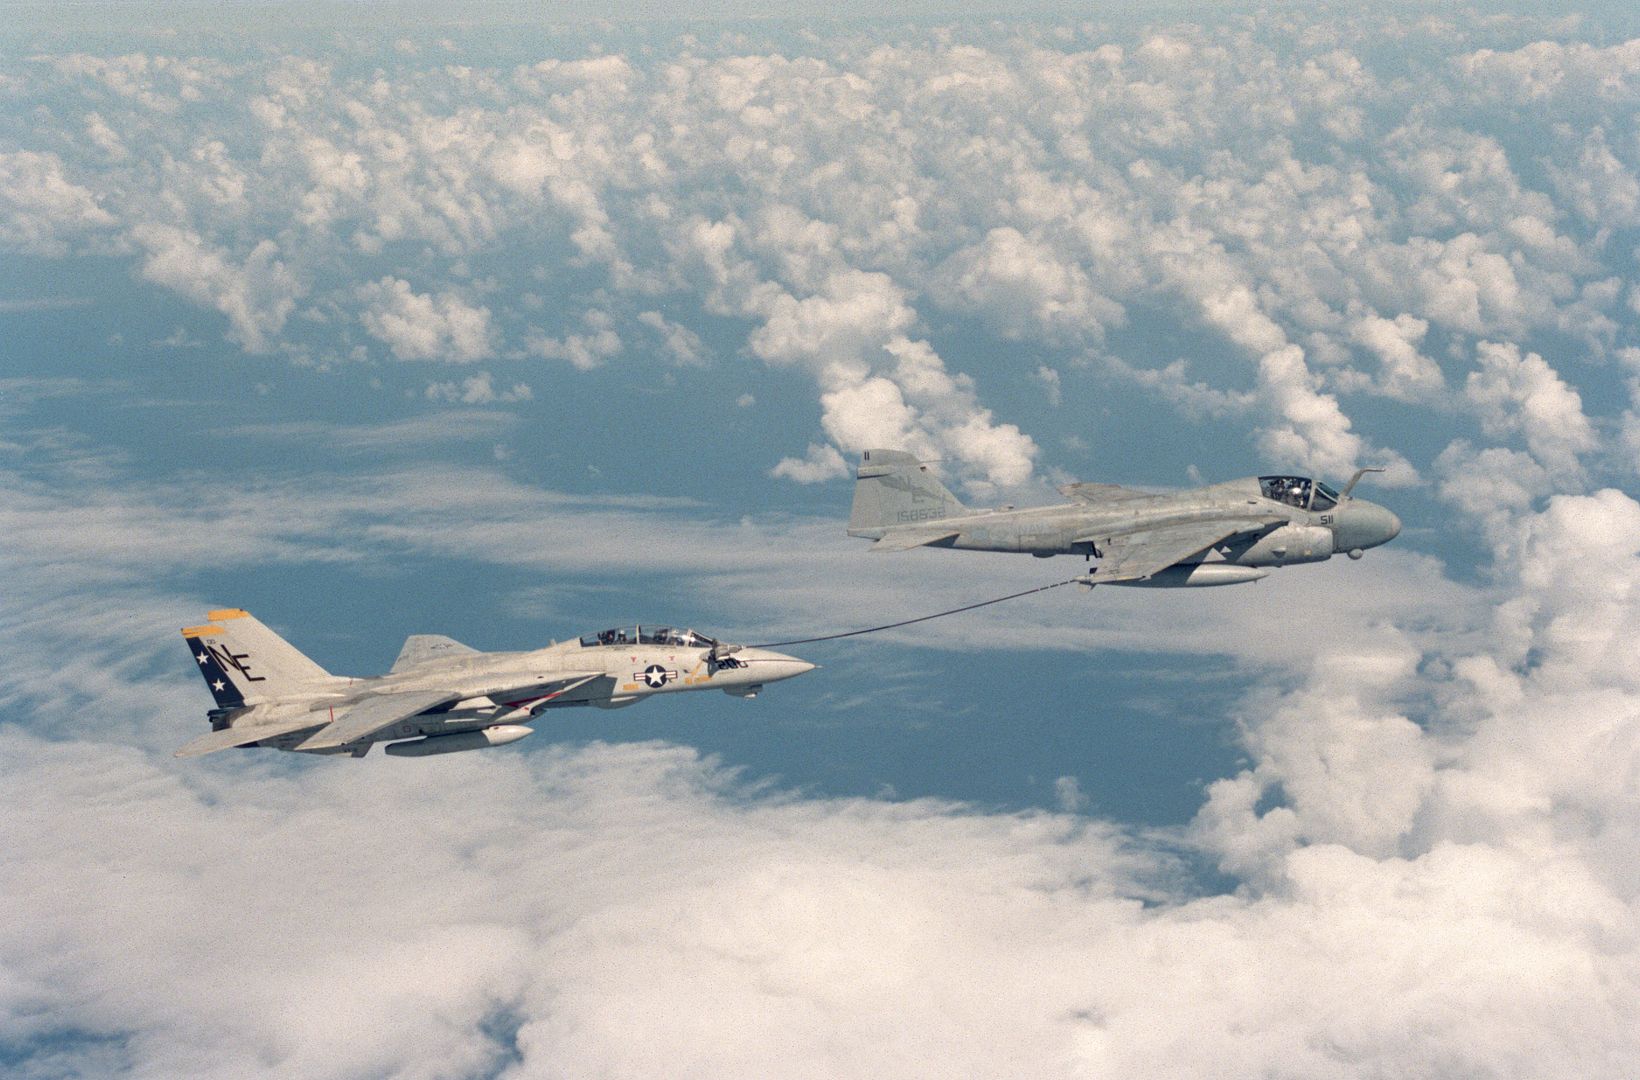 A Fighter Squadron 2 F 14A Tomcat Aircraft Takes On Fuel From An A 6E Intruder Aircraft Equipped With A Buddy Refueling Tank During A Flight Off Of The Aircraft Carrier USS RANGER